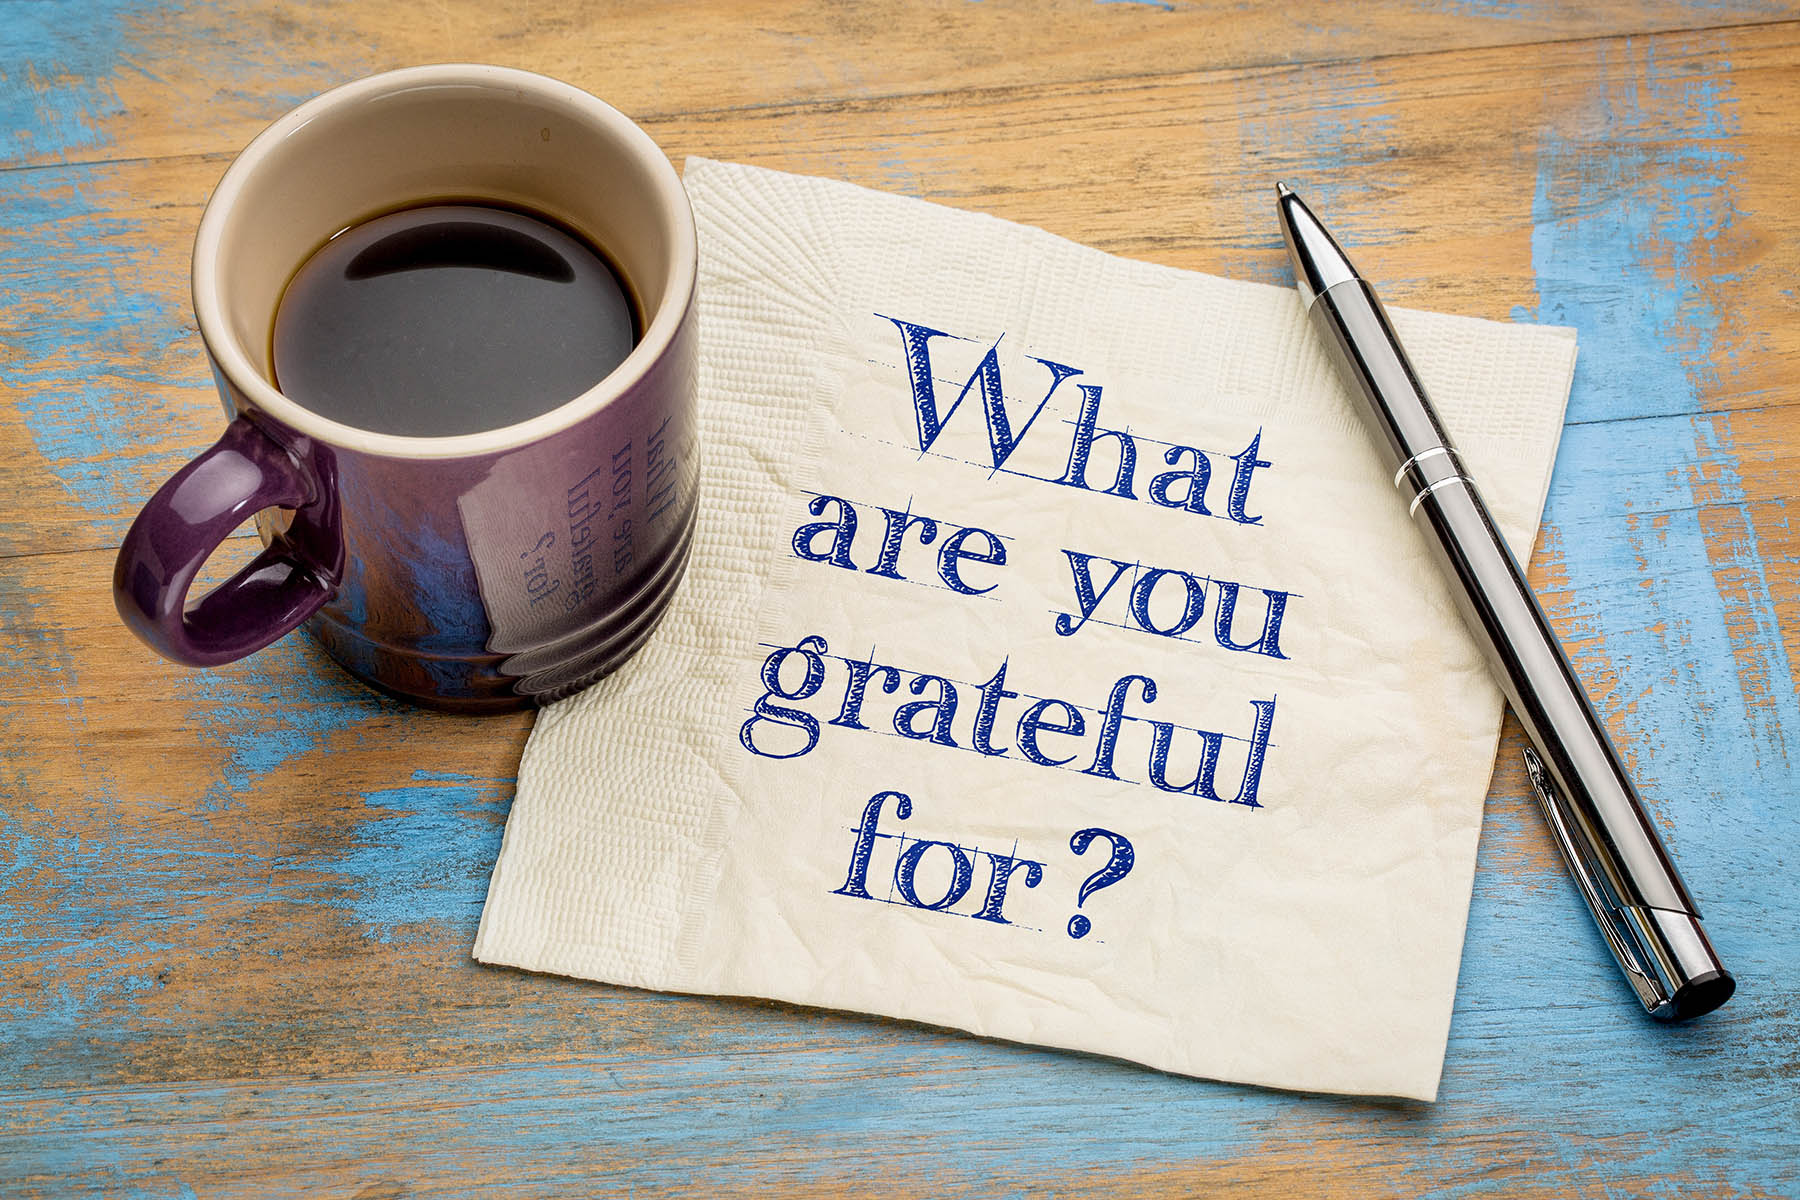 Gratitude and Appreciation: Saying Thank You